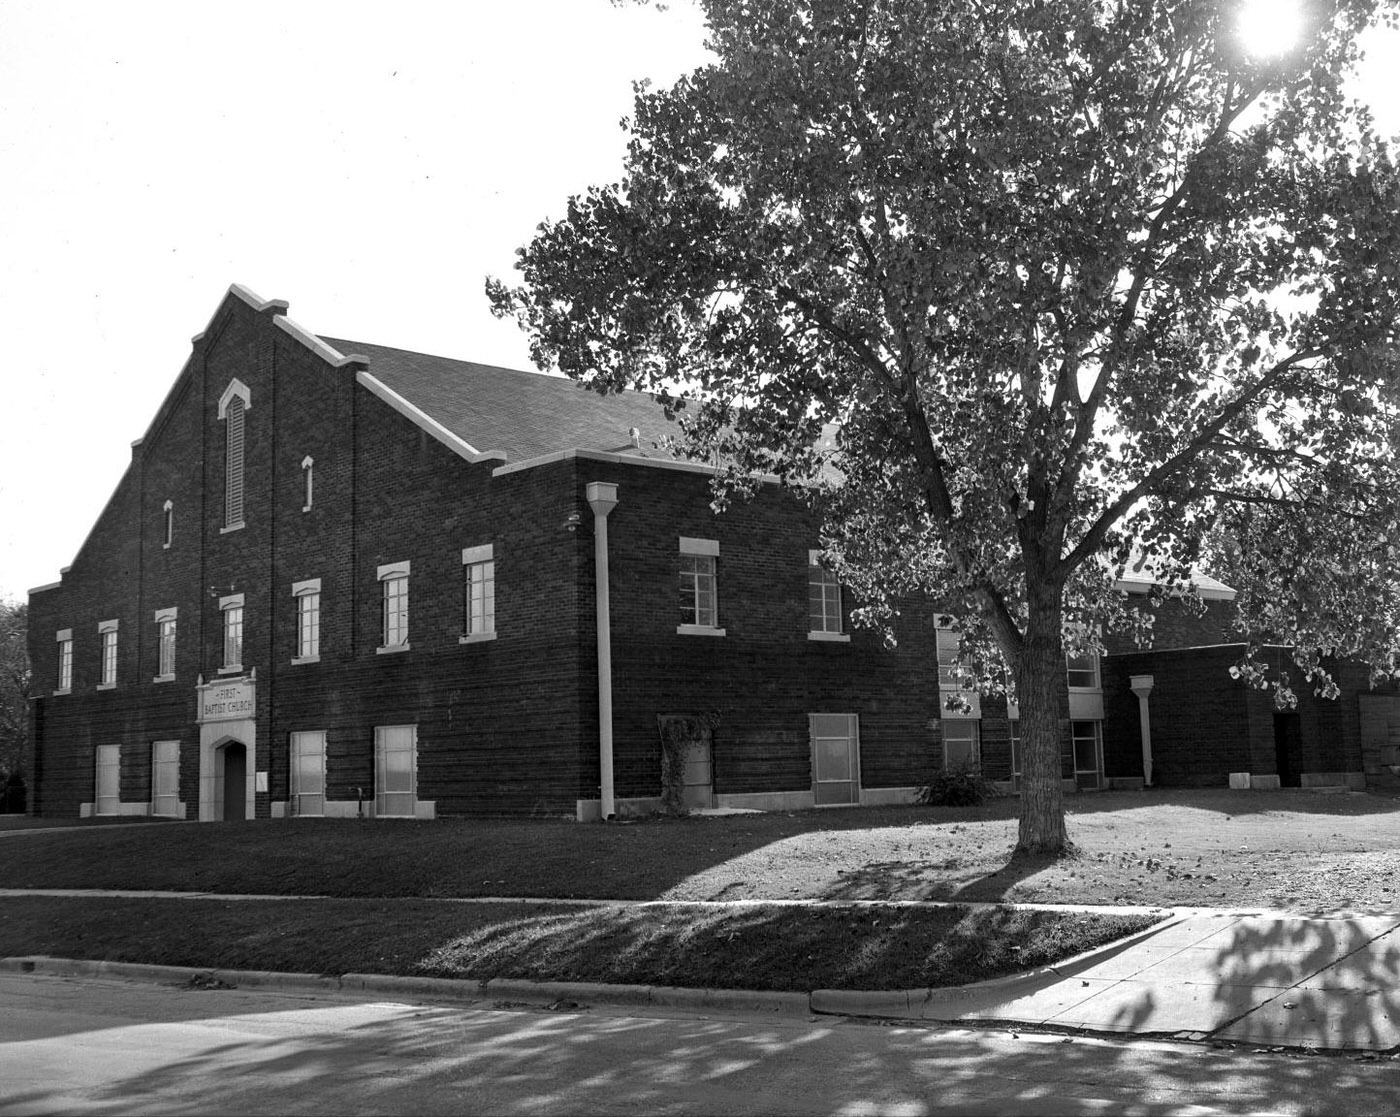 First Baptist Church in Taylor, Texas with Tree, 1950